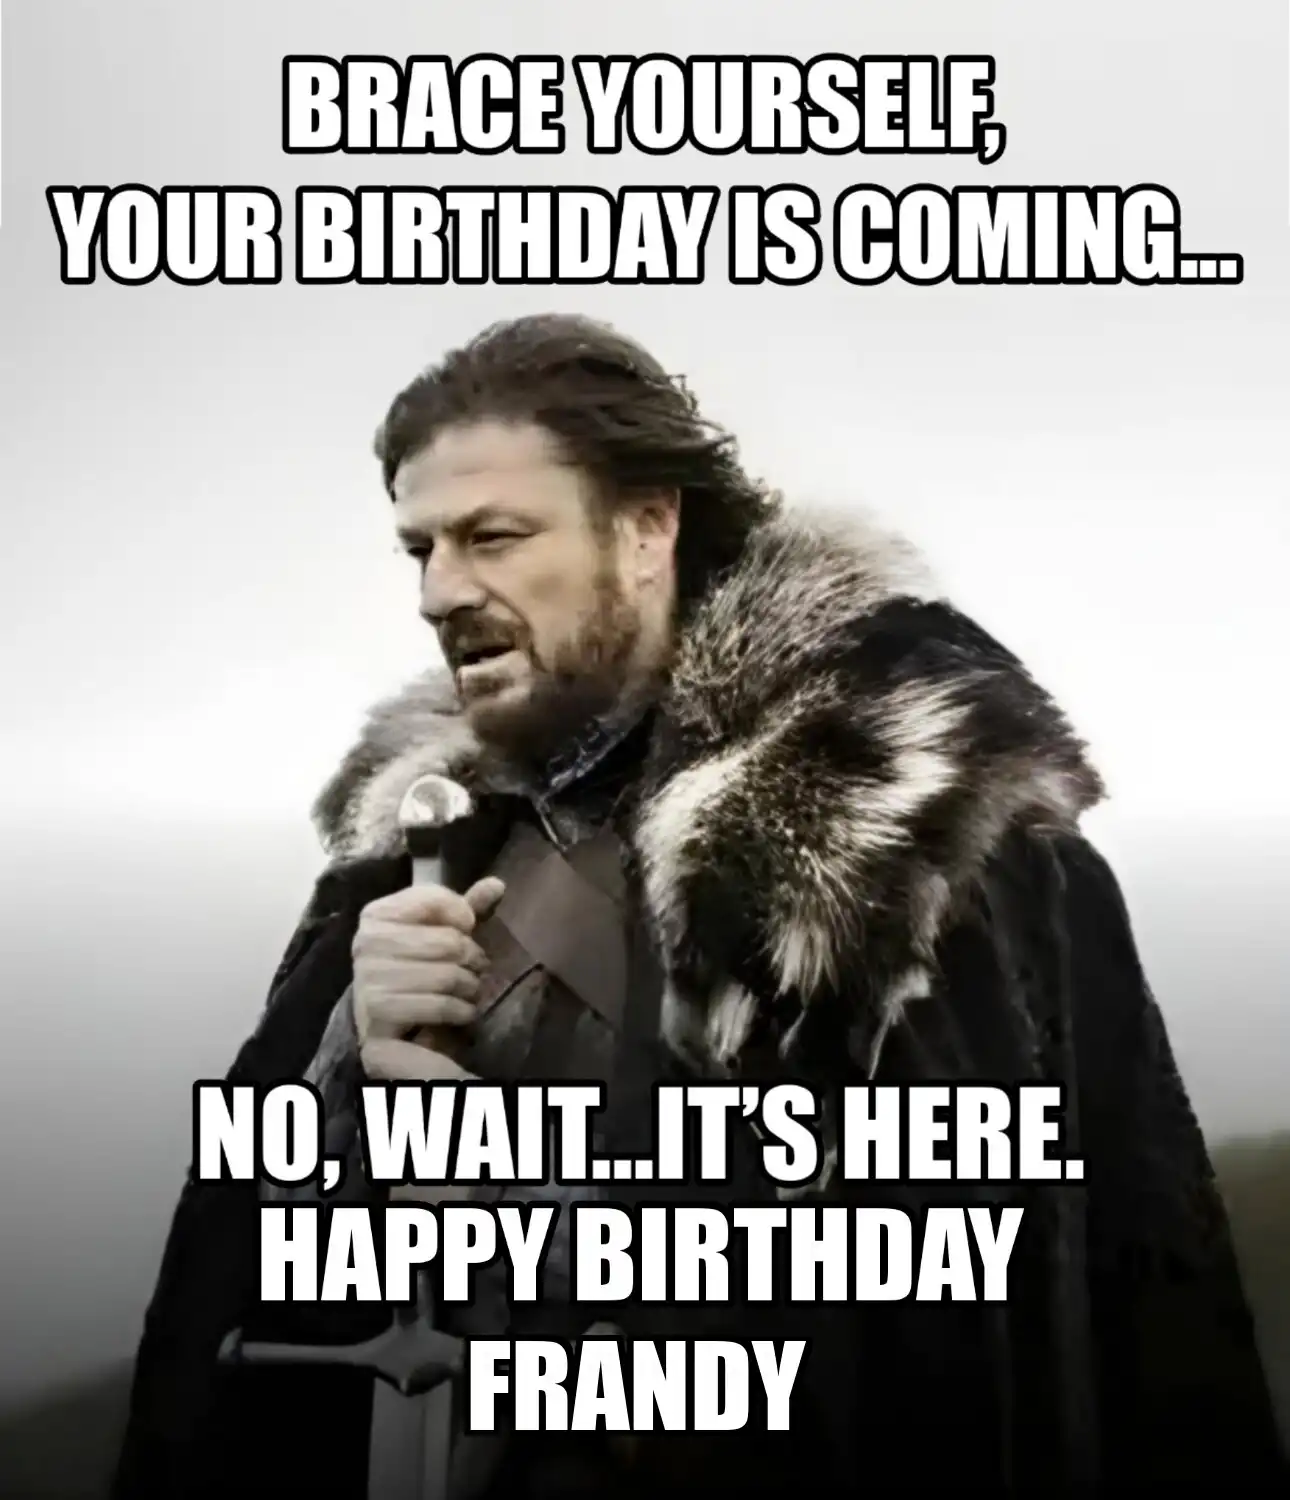 Happy Birthday Frandy Brace Yourself Your Birthday Is Coming Meme